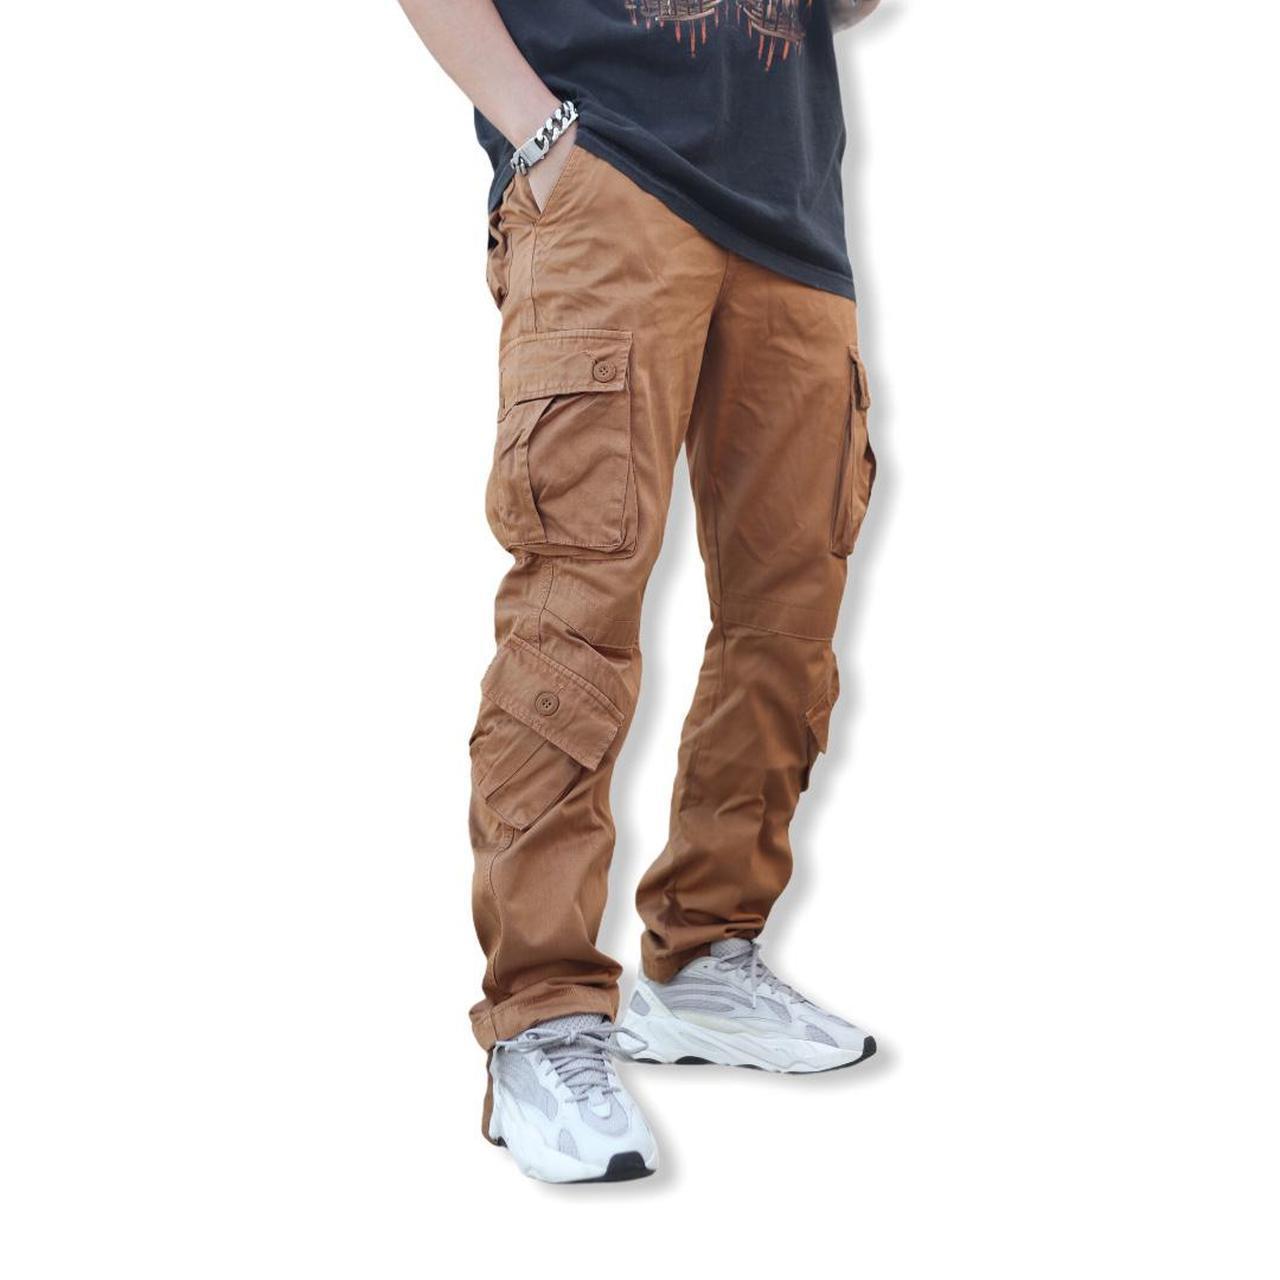 Product Image 2 - Cargo Pants Mustard
• Relax fit
•